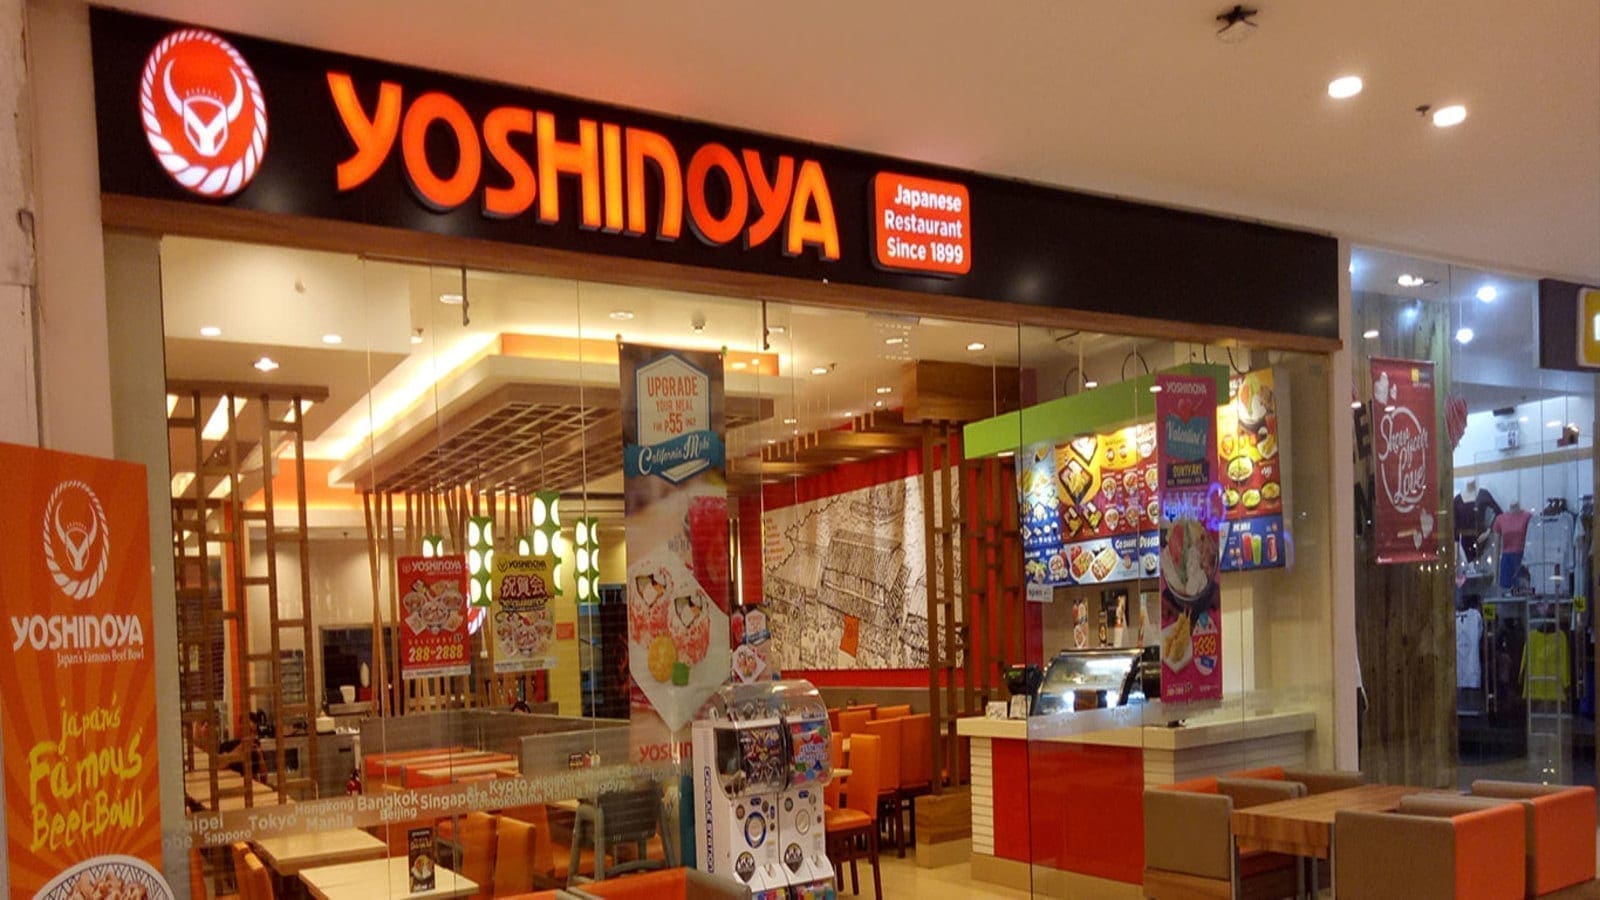 Japan’s Yoshinoya to set up a US$2.7 million joint venture in the Philippines with local giant Jollibee Foods